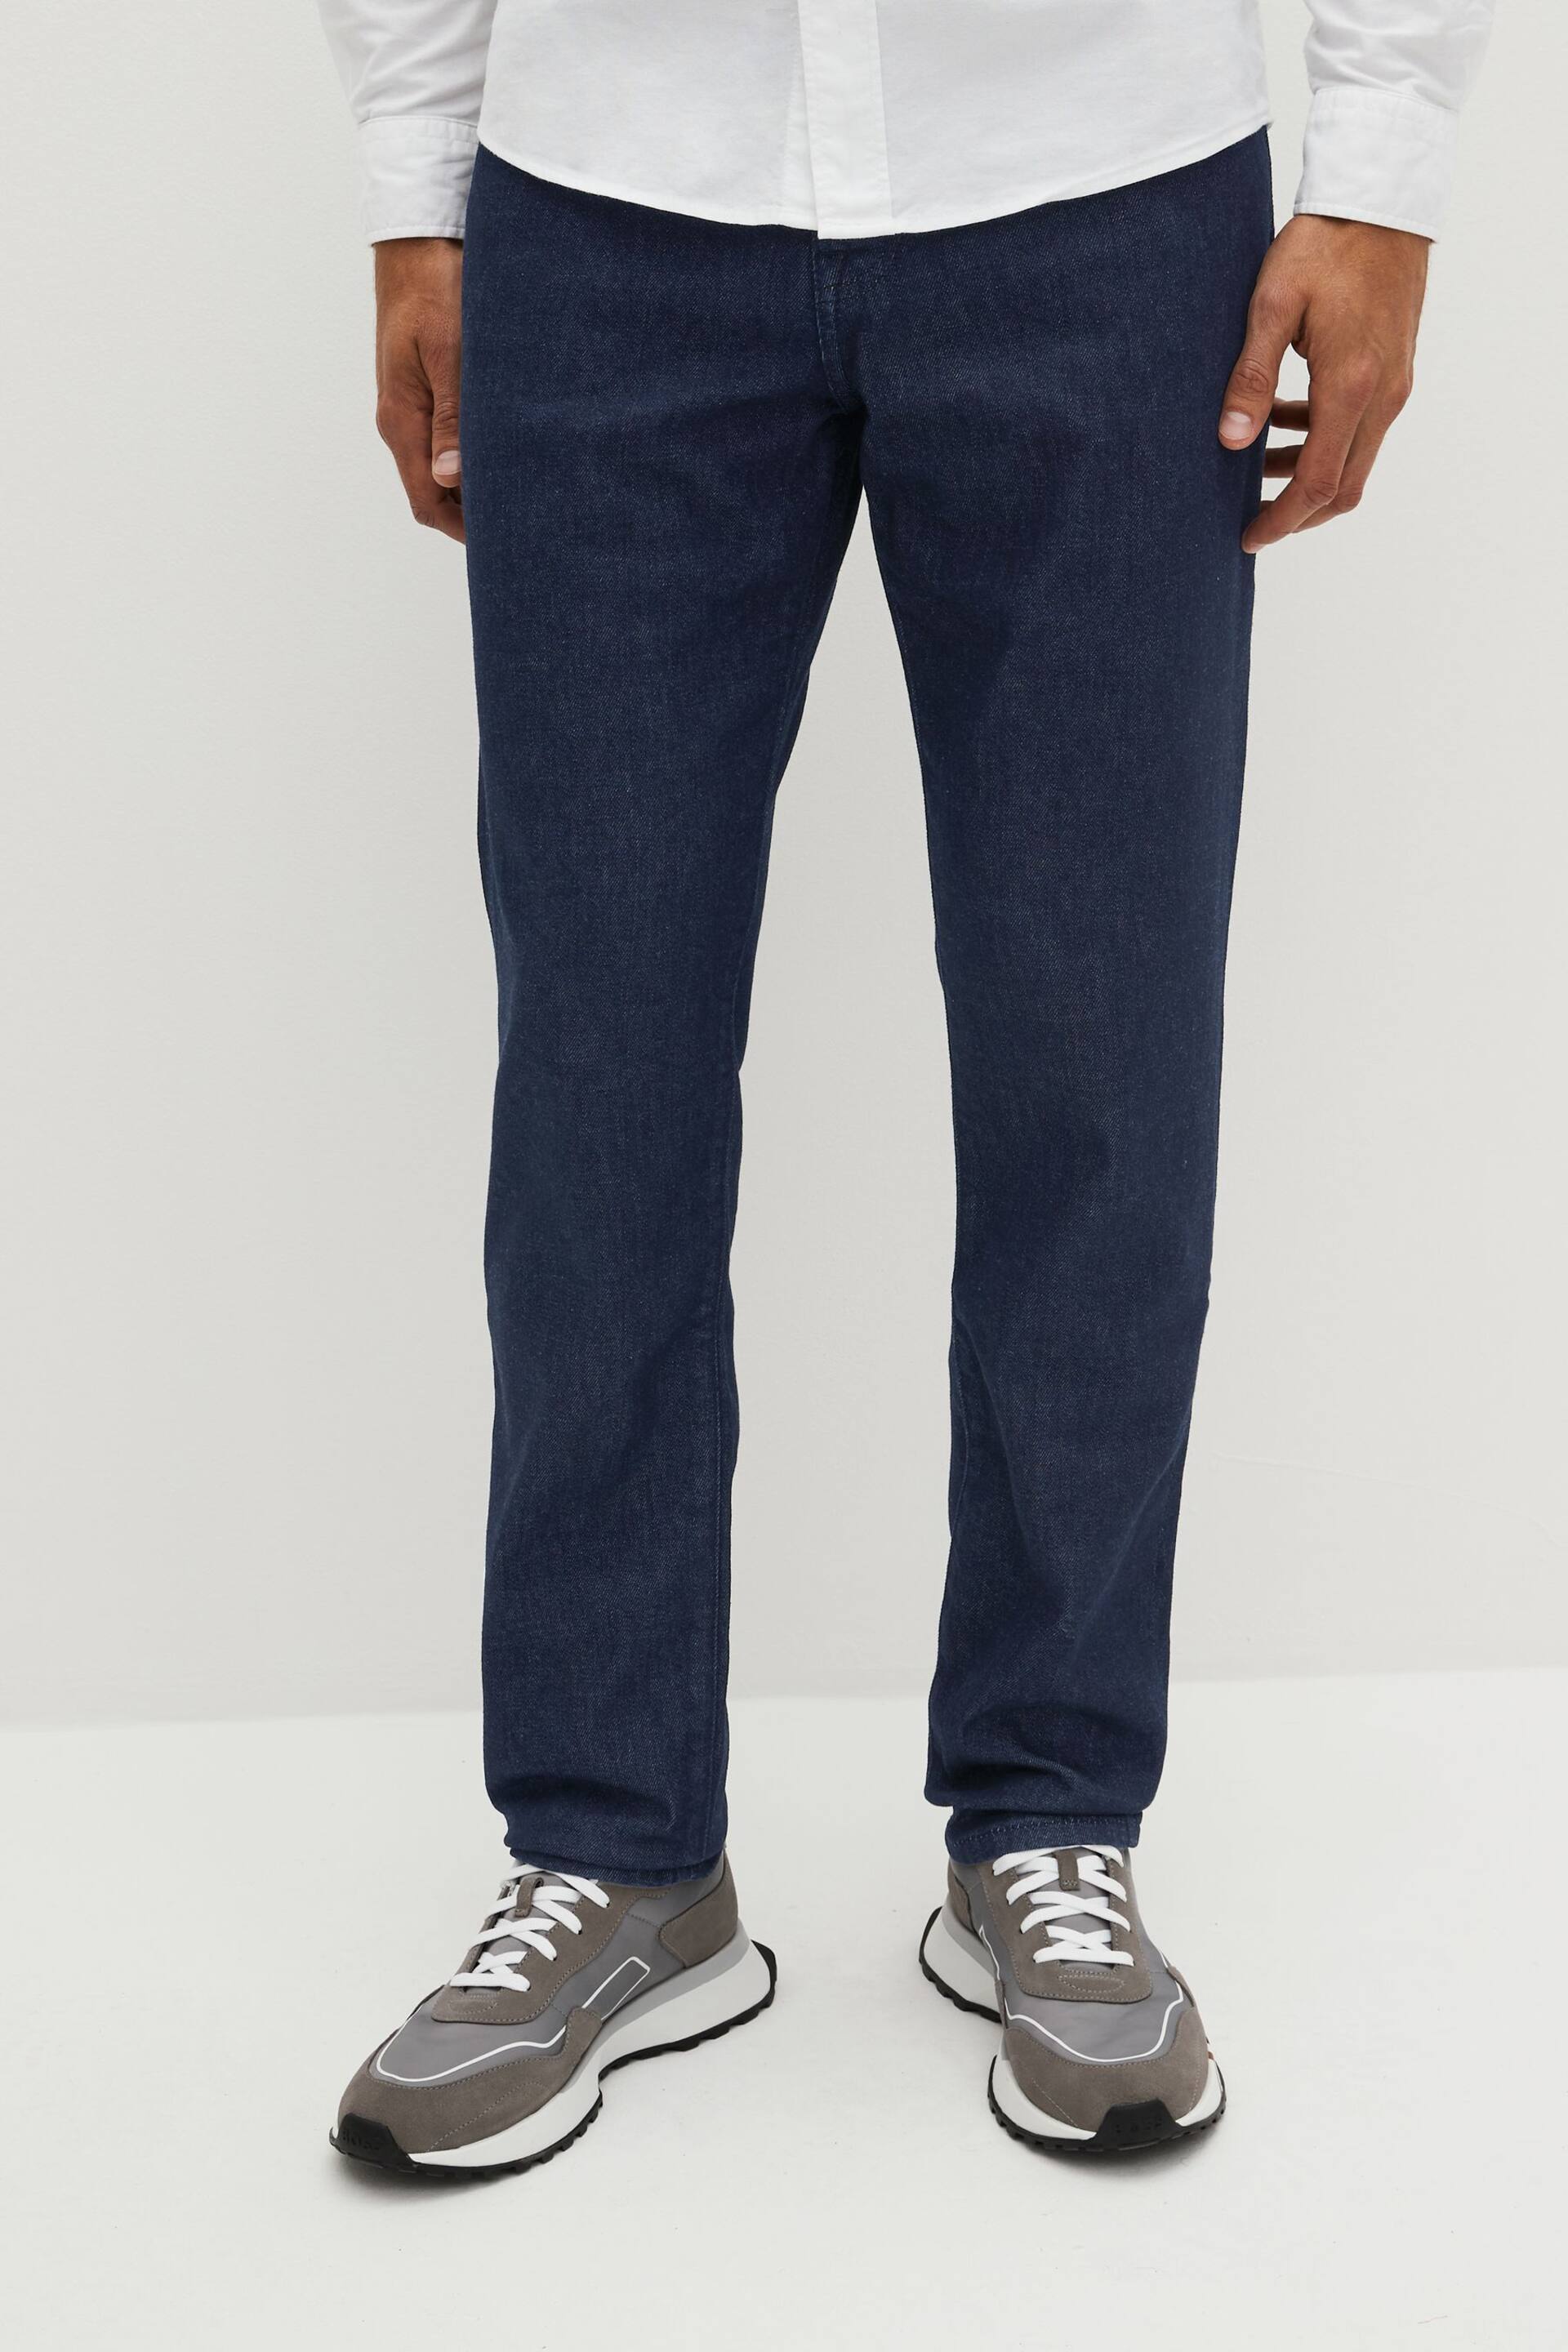 BOSS Indigo Blue Maine Straight Fit Stretch Jeans - Image 1 of 4